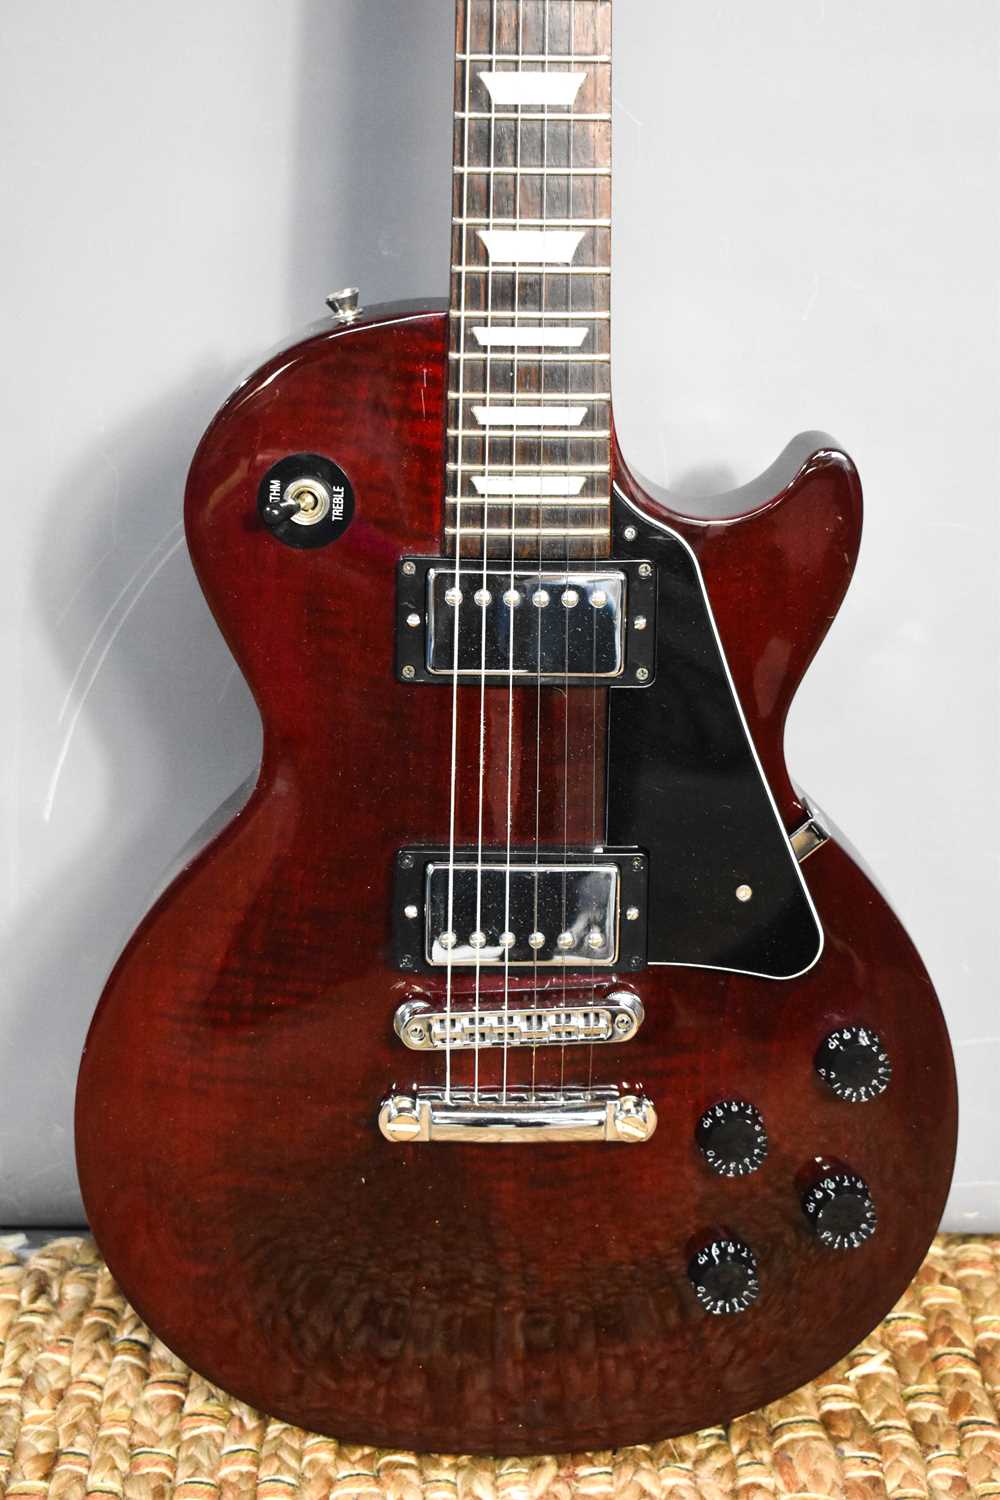 A 2002 Gibson Les Paul Studio guitar, wine red, with Grover vintage tuners and Tone Pros bridge - Image 2 of 3